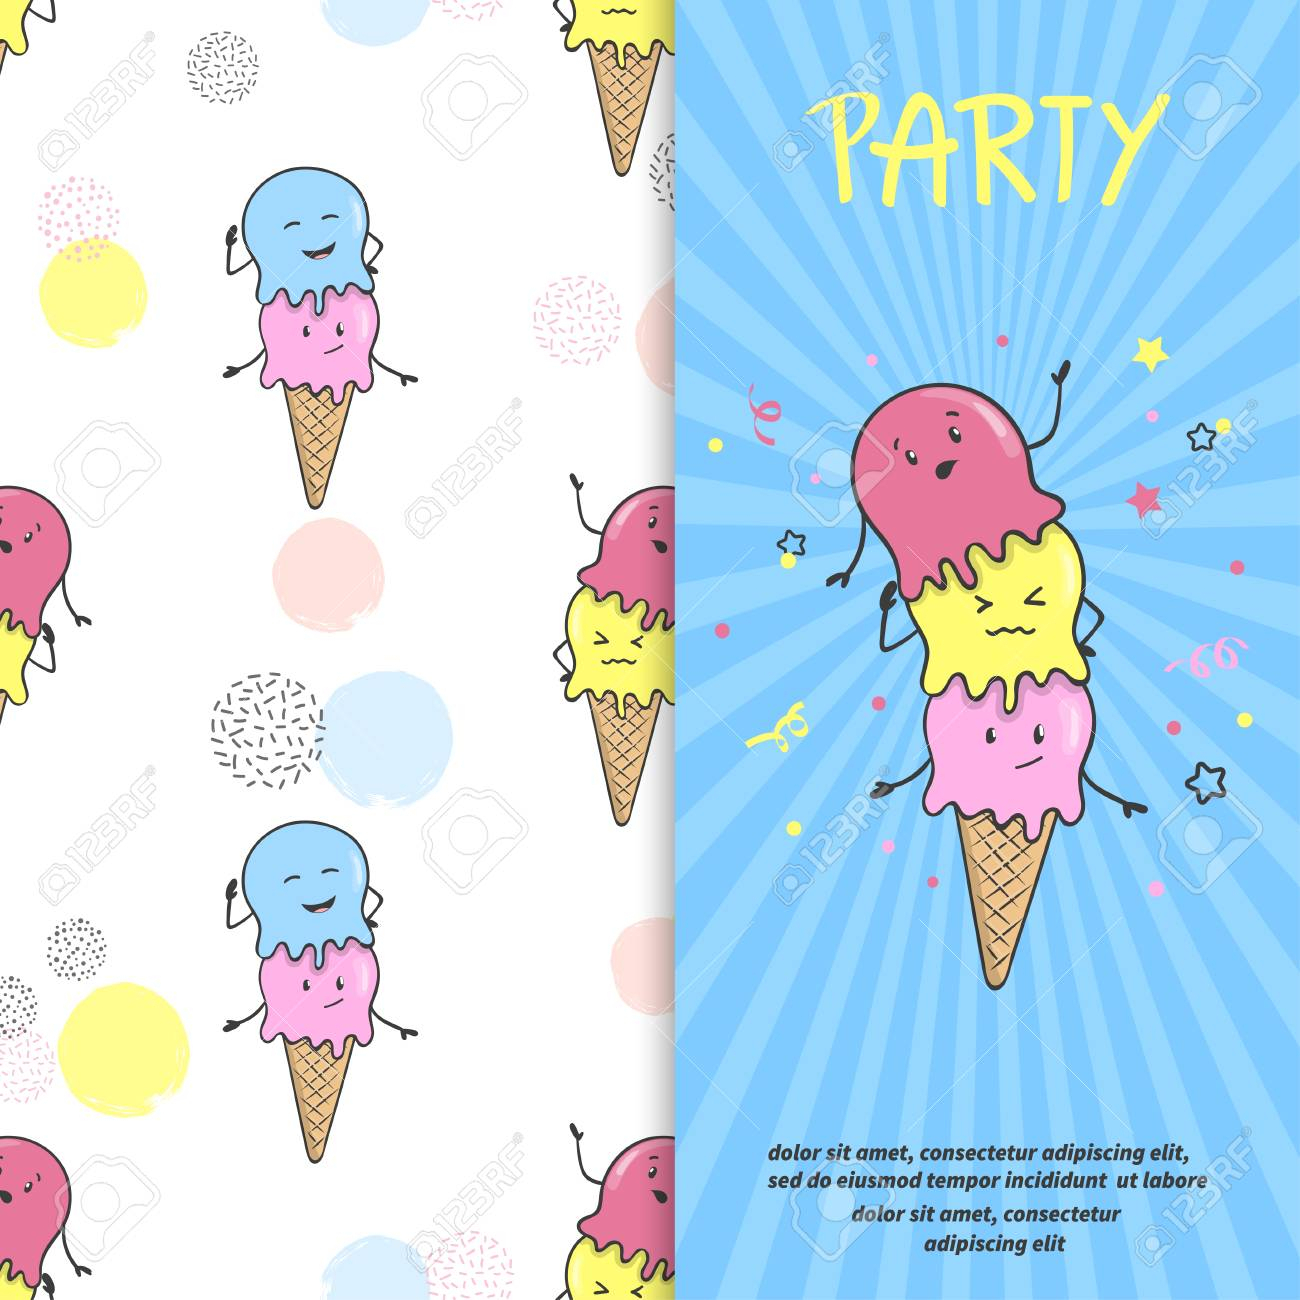 Ice Cream Party Invitation Or Poster Template. Vector Cartoon.. Throughout Ice Cream Party Flyer Template